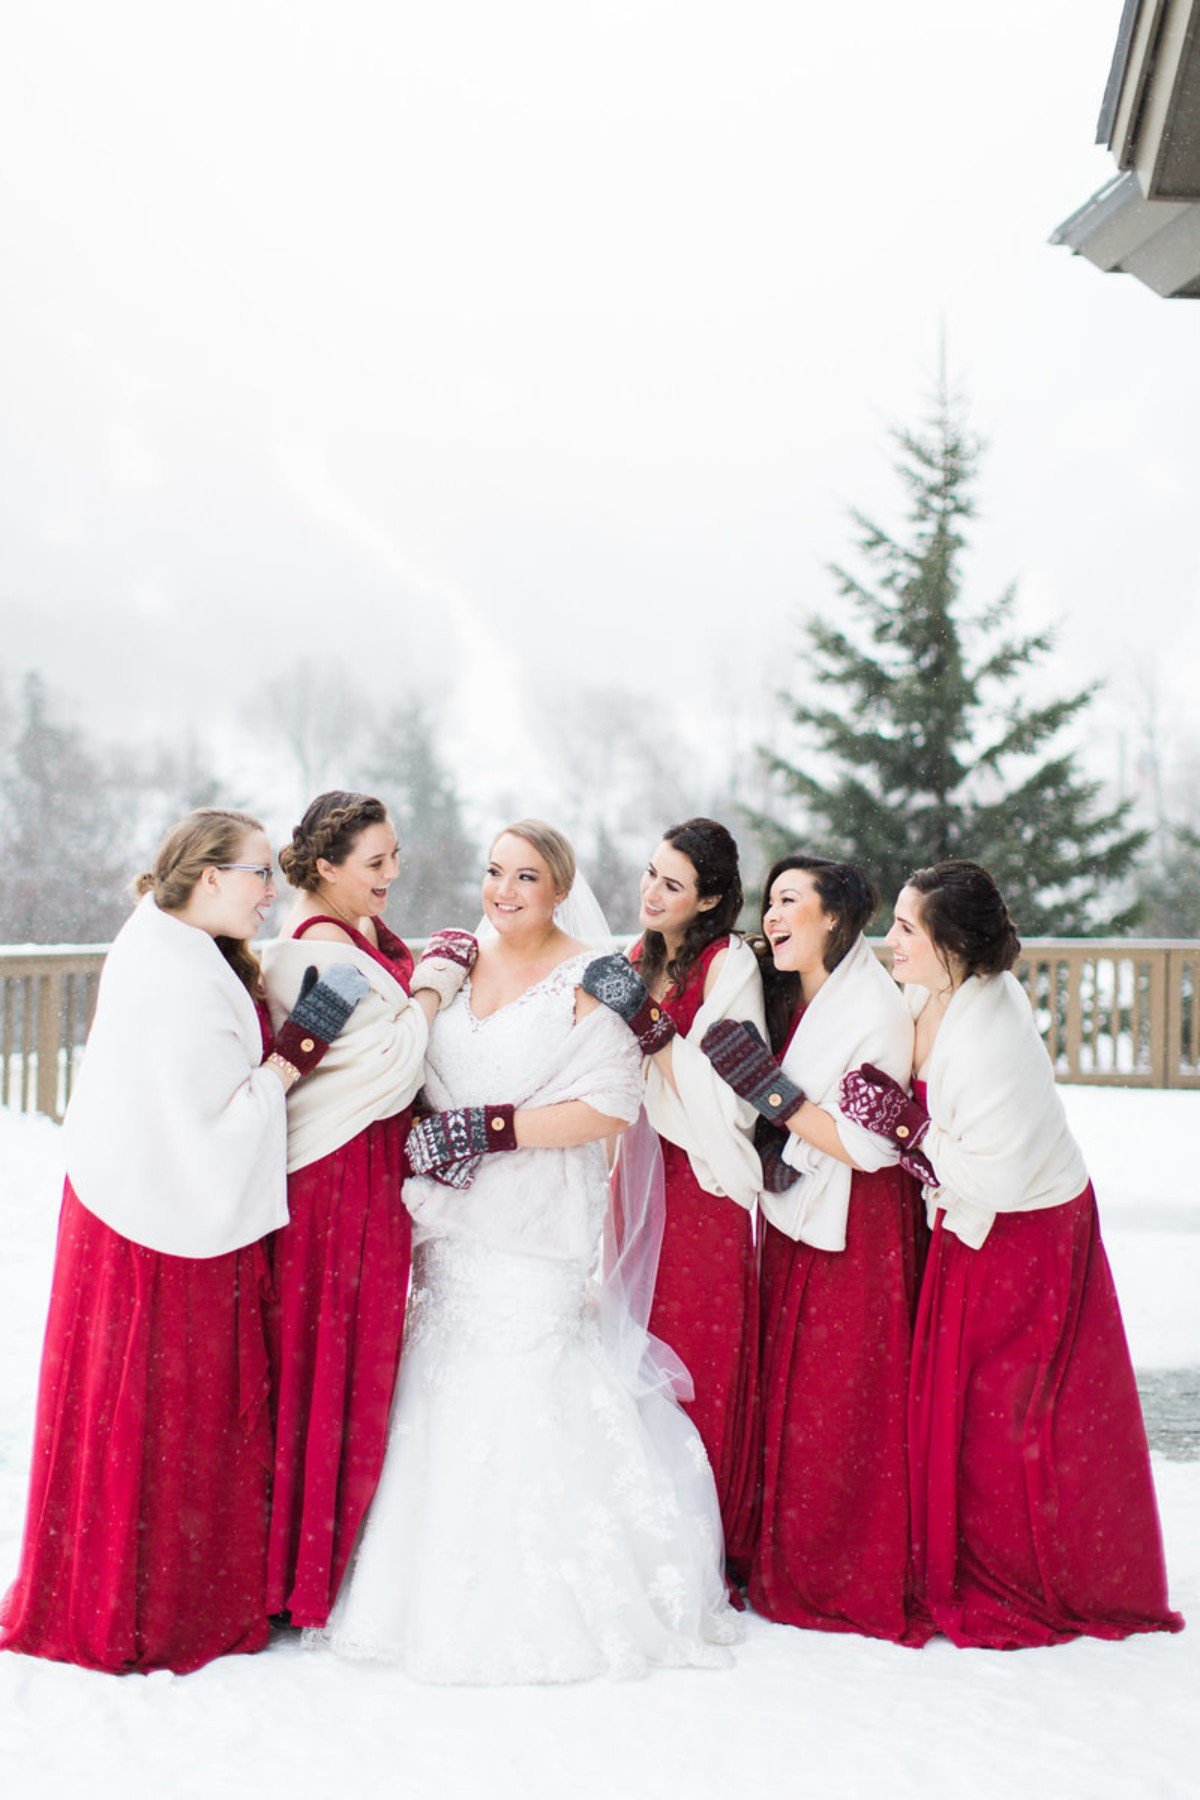 Winter bridesmaid look with mittens